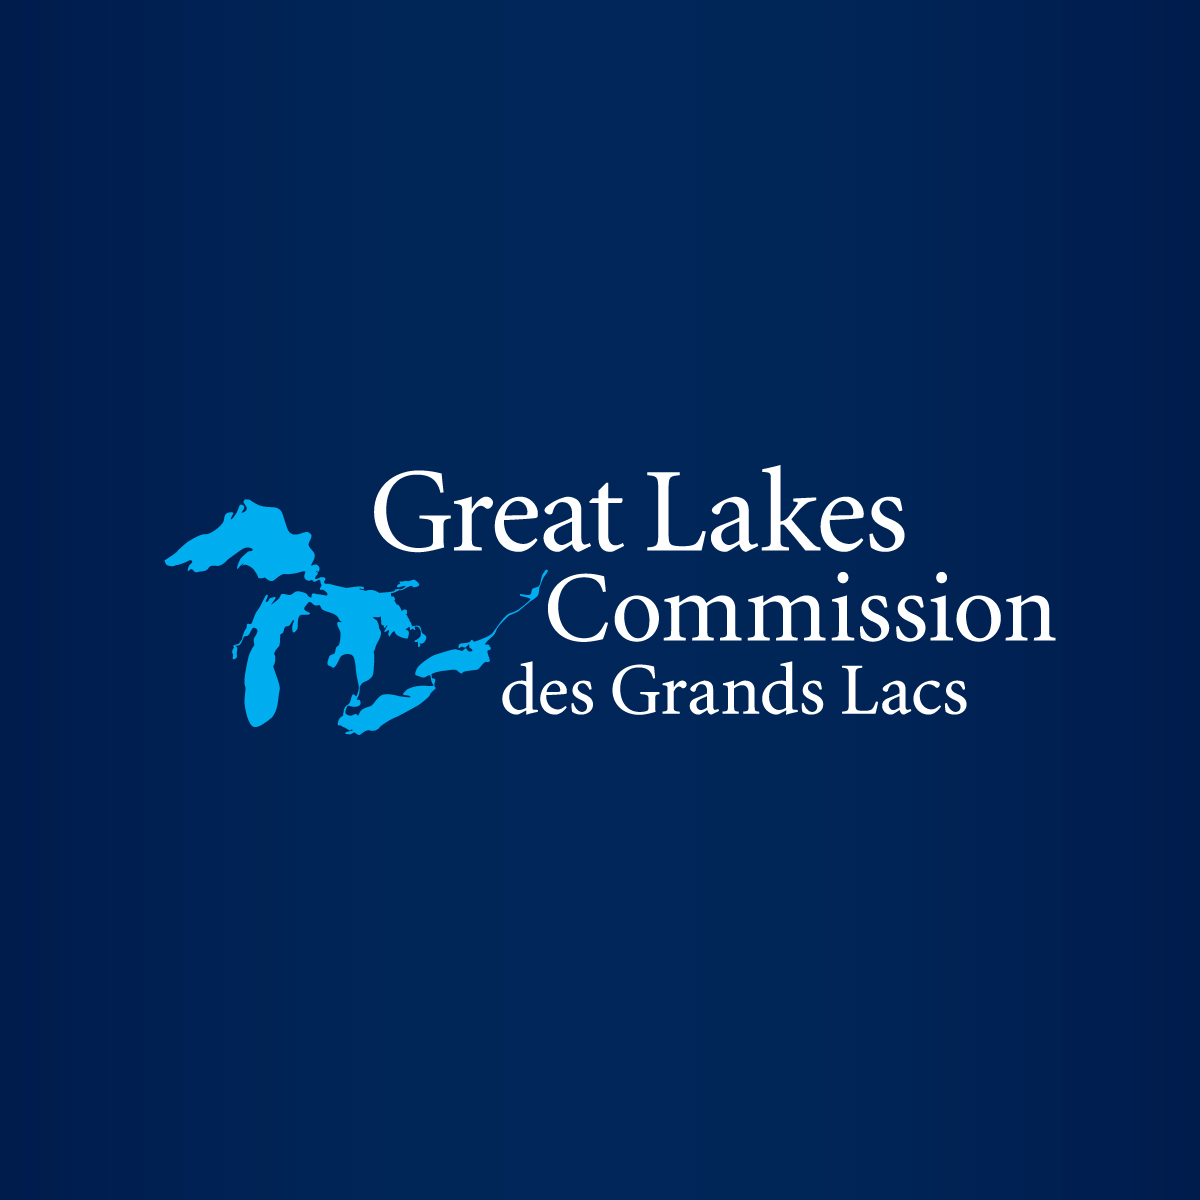 A multination effort to restore the Great Lakes: A watershed moment